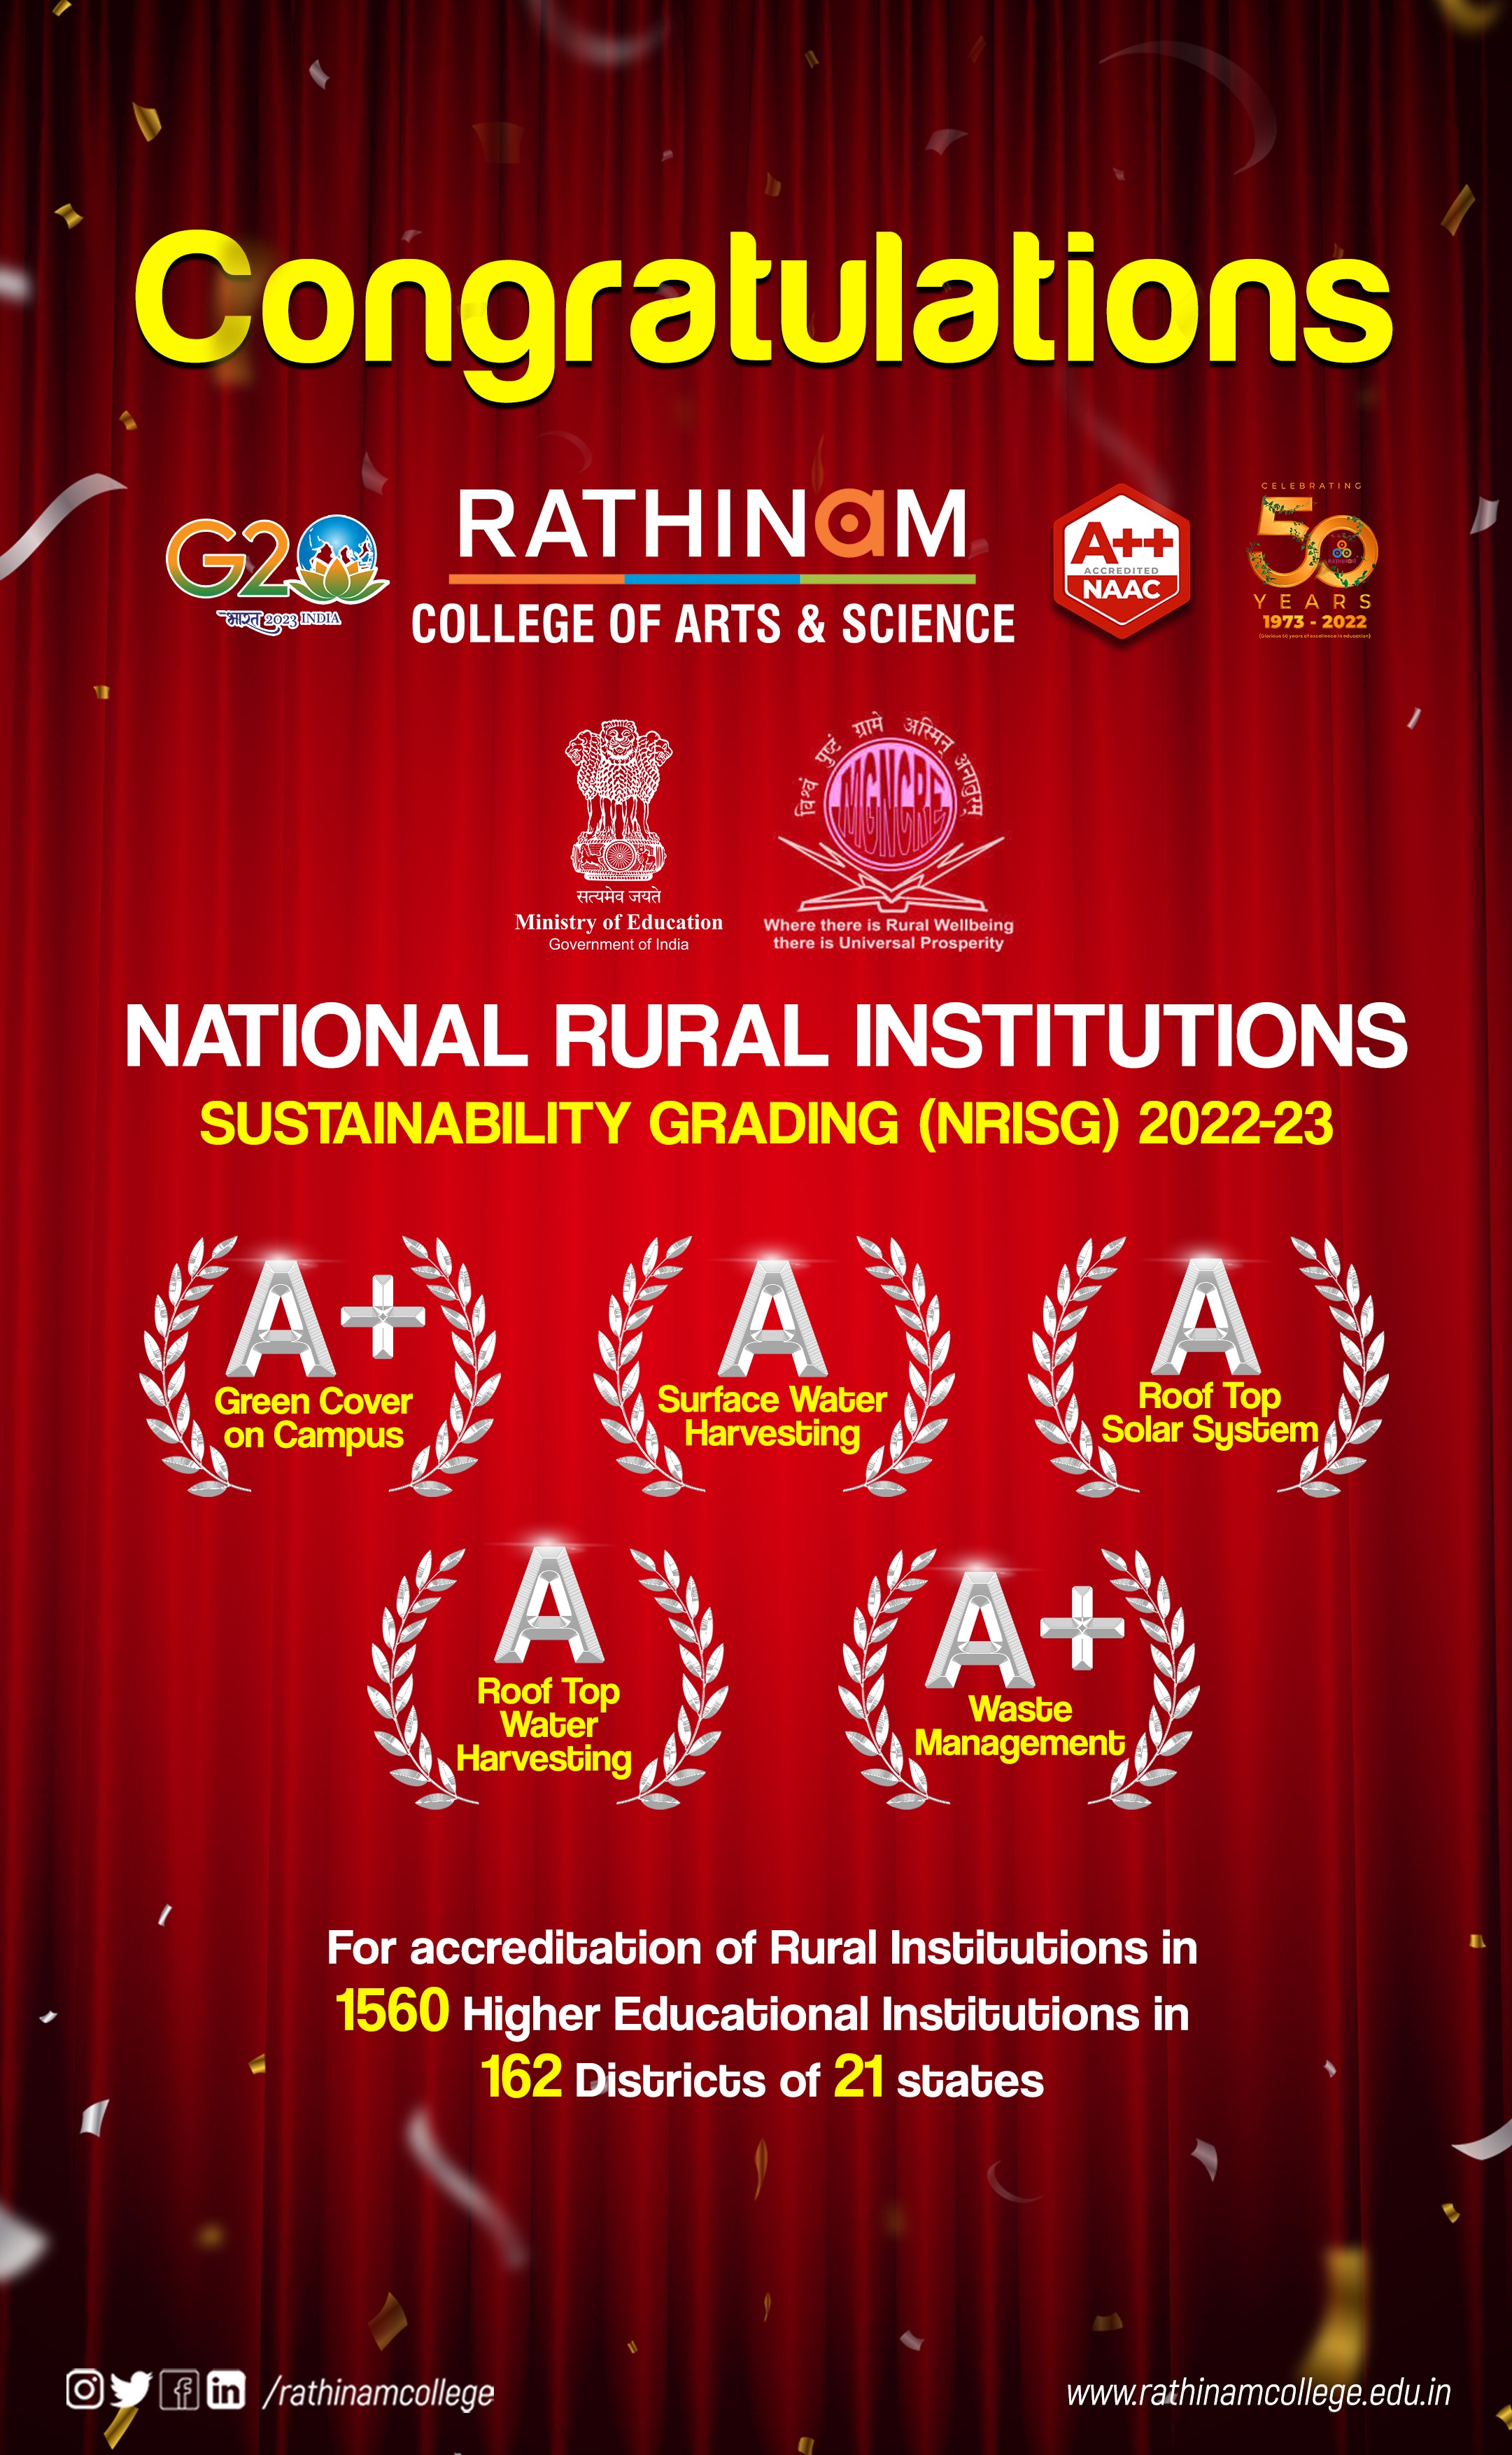 National Rural Institutions Sustainability Grading